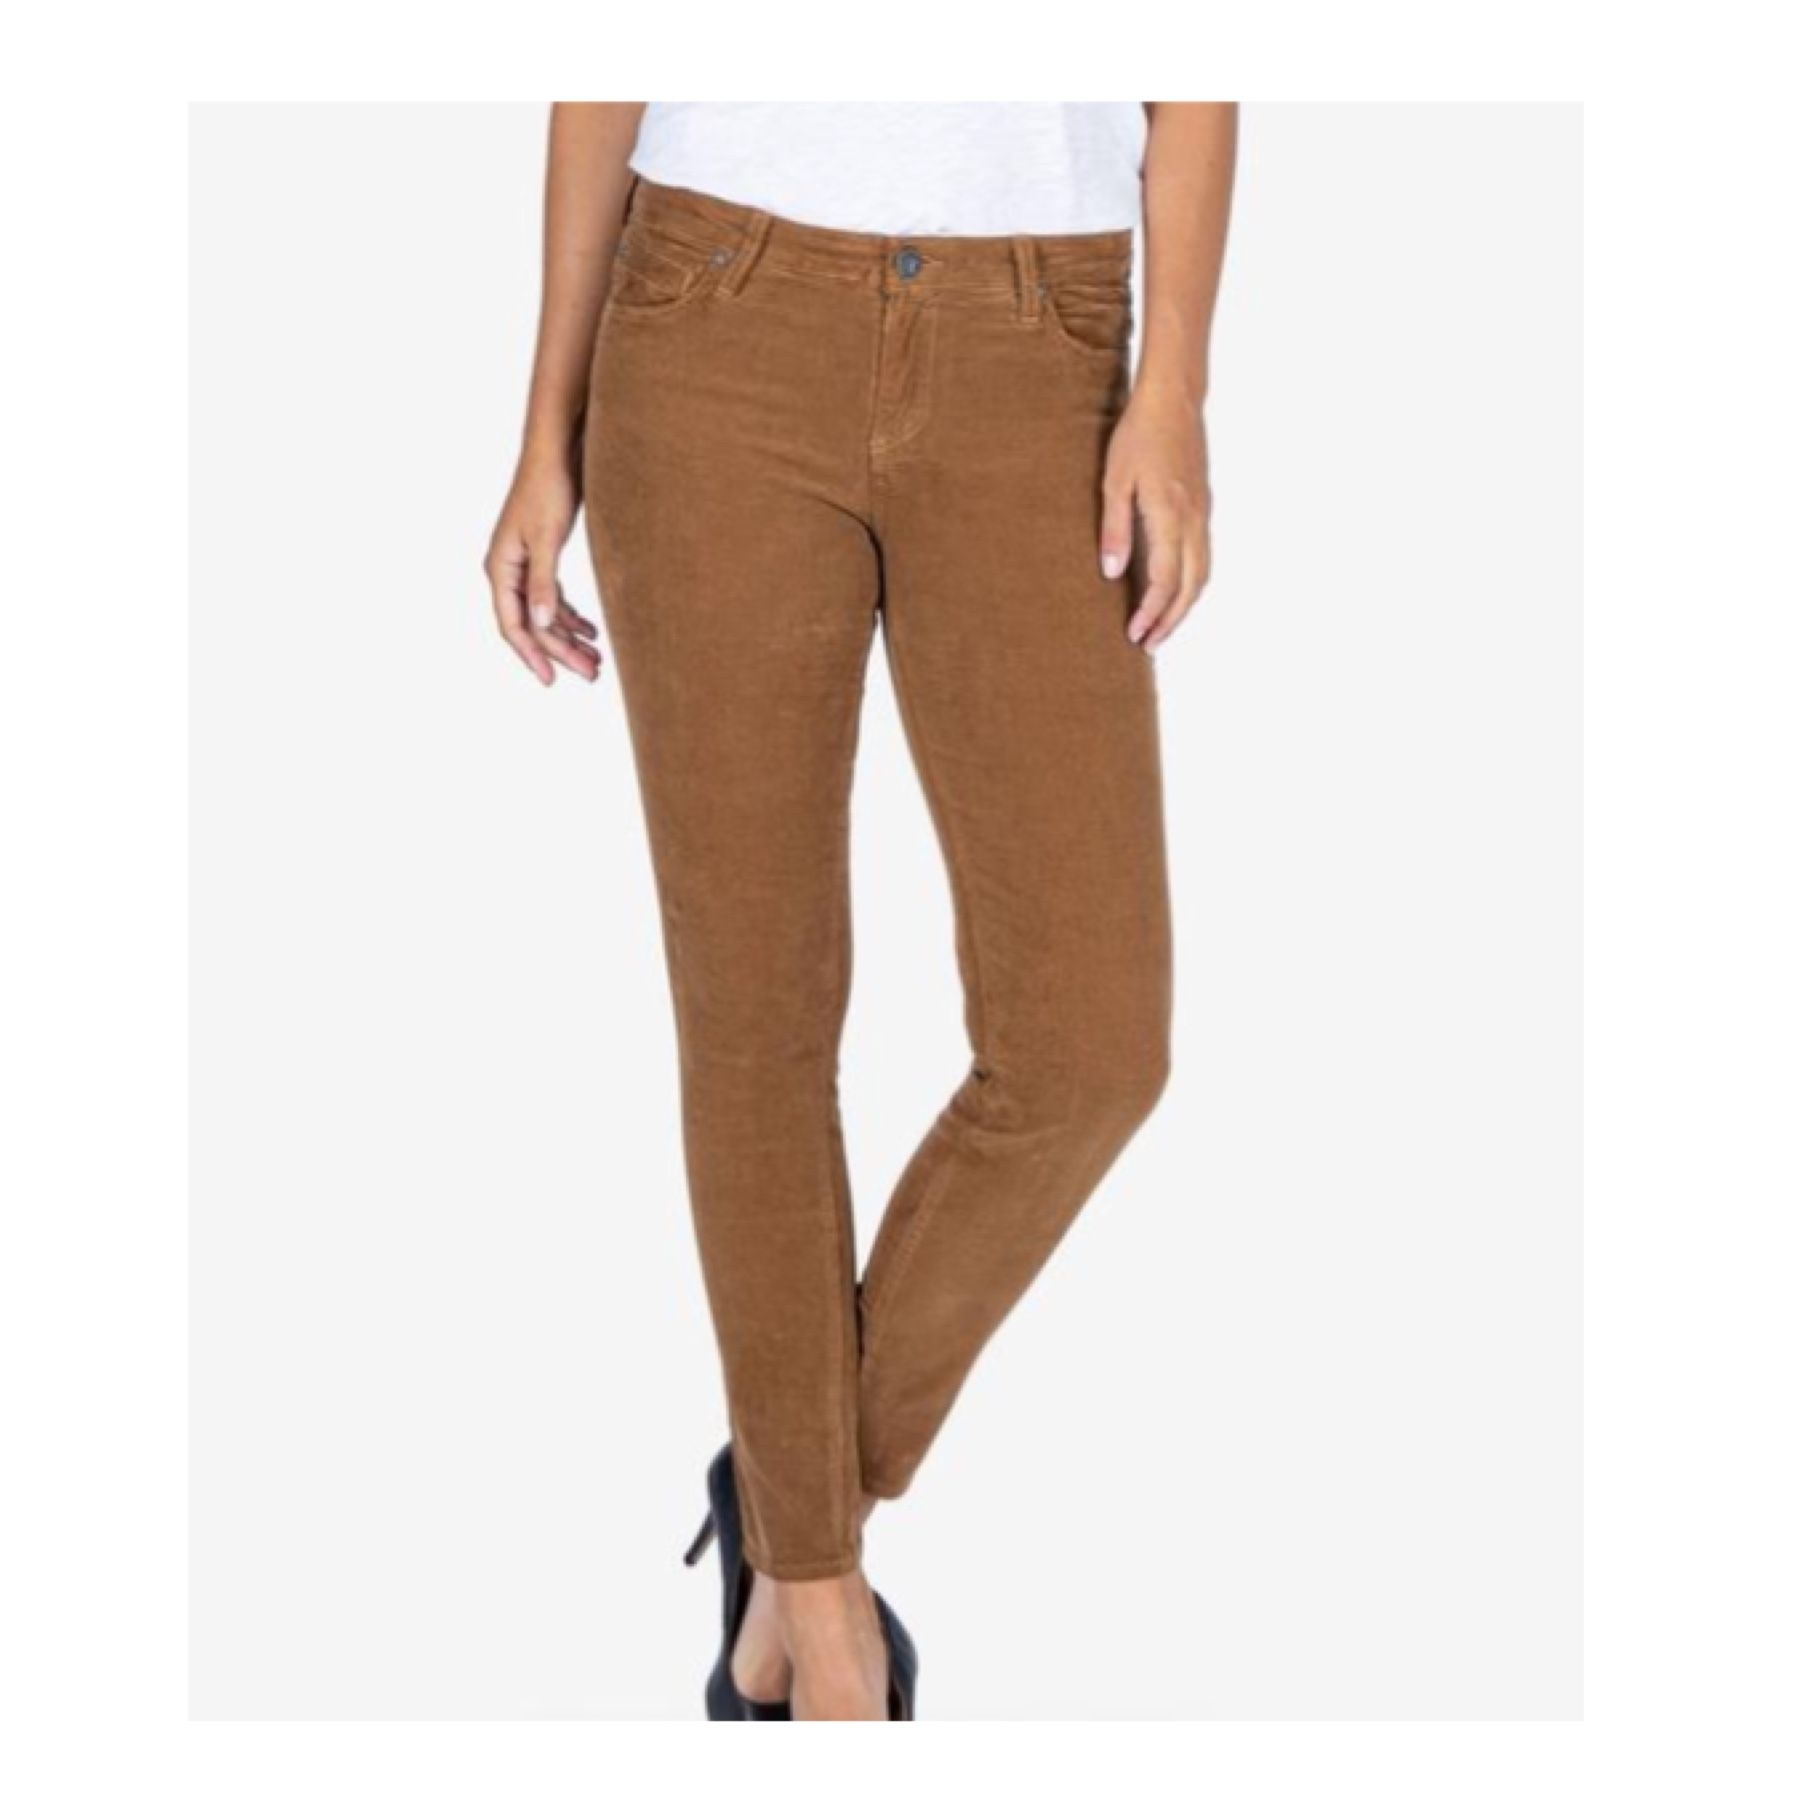 Kut Tan Brown Mia Toothpick Skinny Jeans Corduroy Pants Women’s Size 10 NEW WITH TAGS